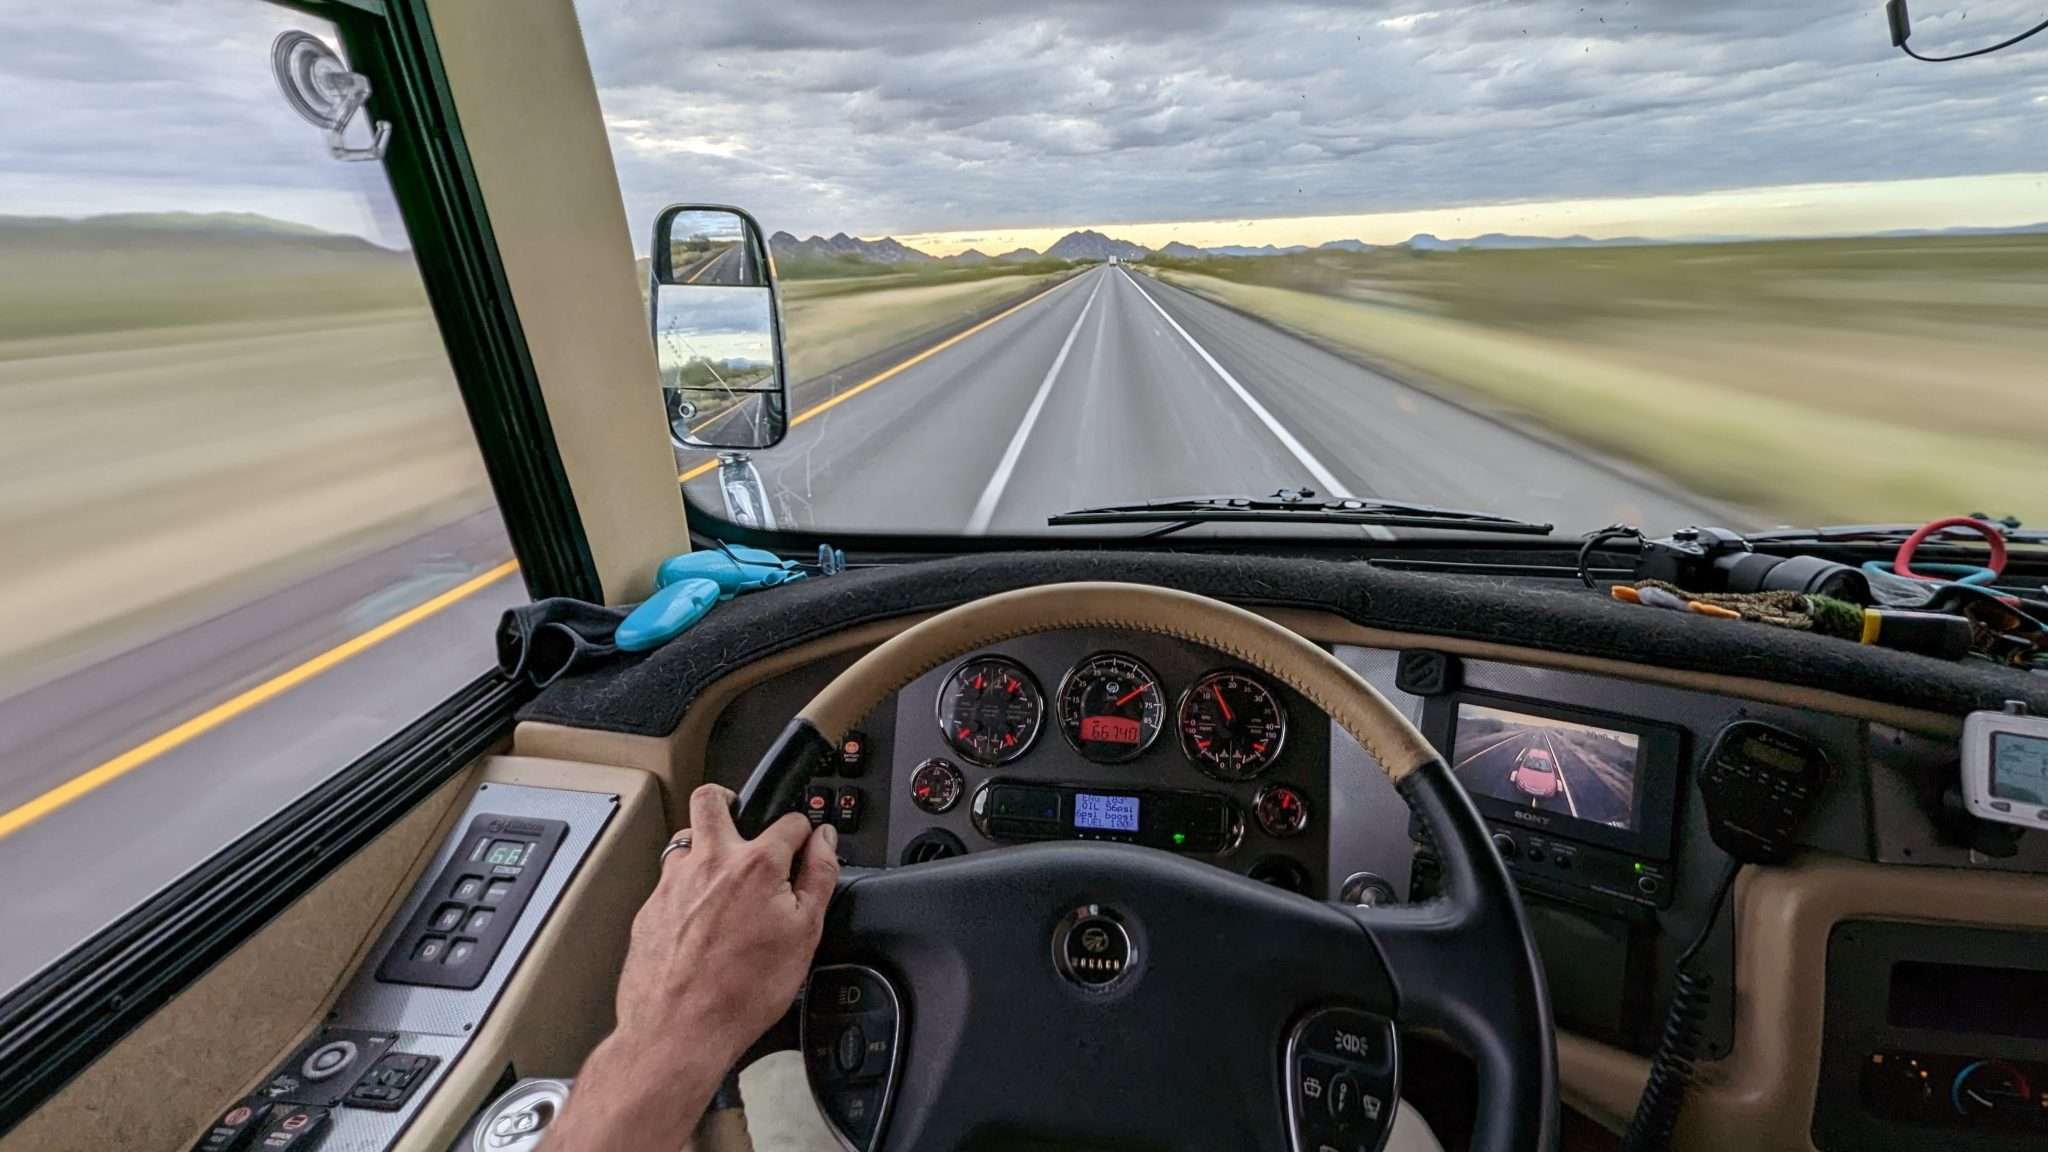 Driving a class A motorhome from the point of view of the driver